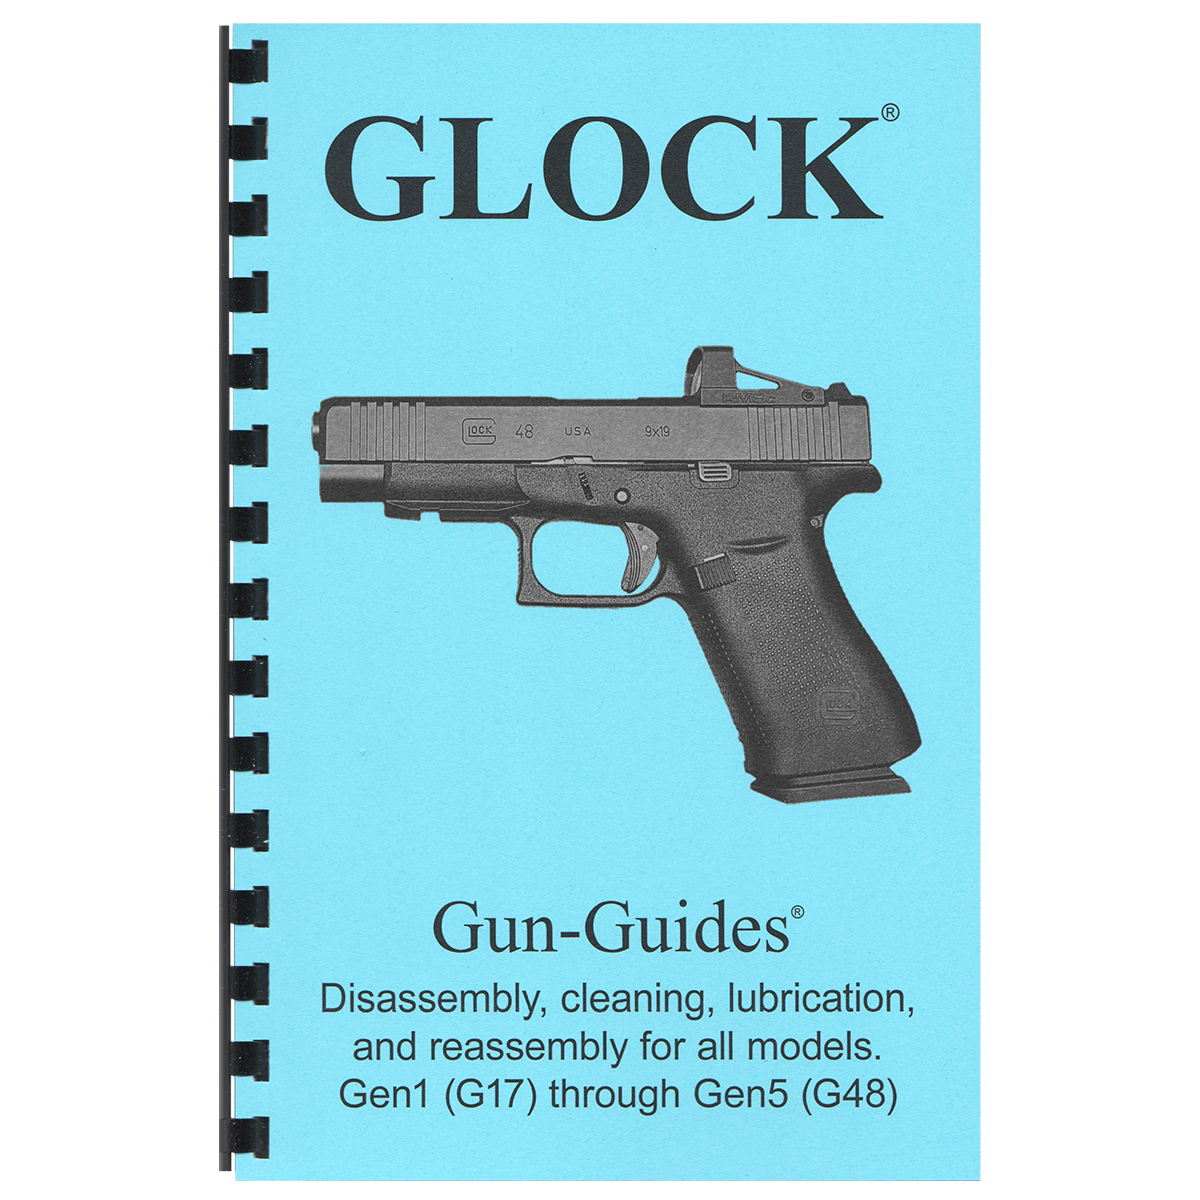 Glock® Pistols Gun-Guides® Disassembly, cleaning, lubrication and reassembly for all models. G17 through G43.